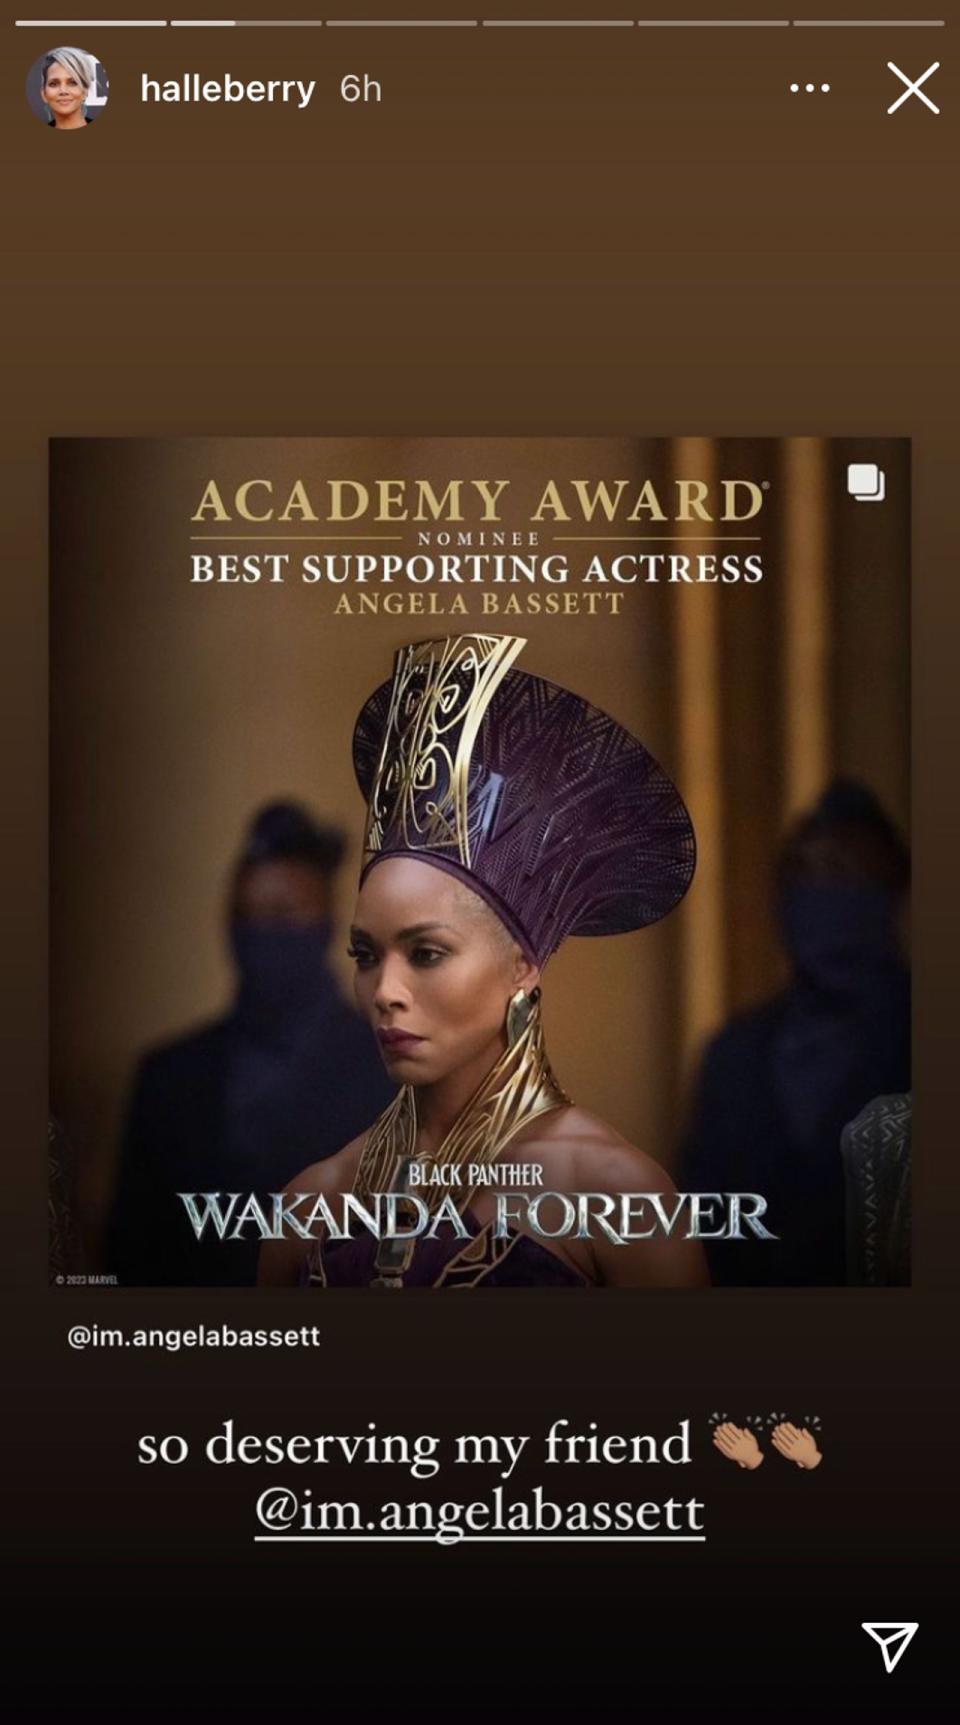 Halle Berry congratulating Angela Bassett for her Oscar nomination for Black Panther: Wakanda Forever